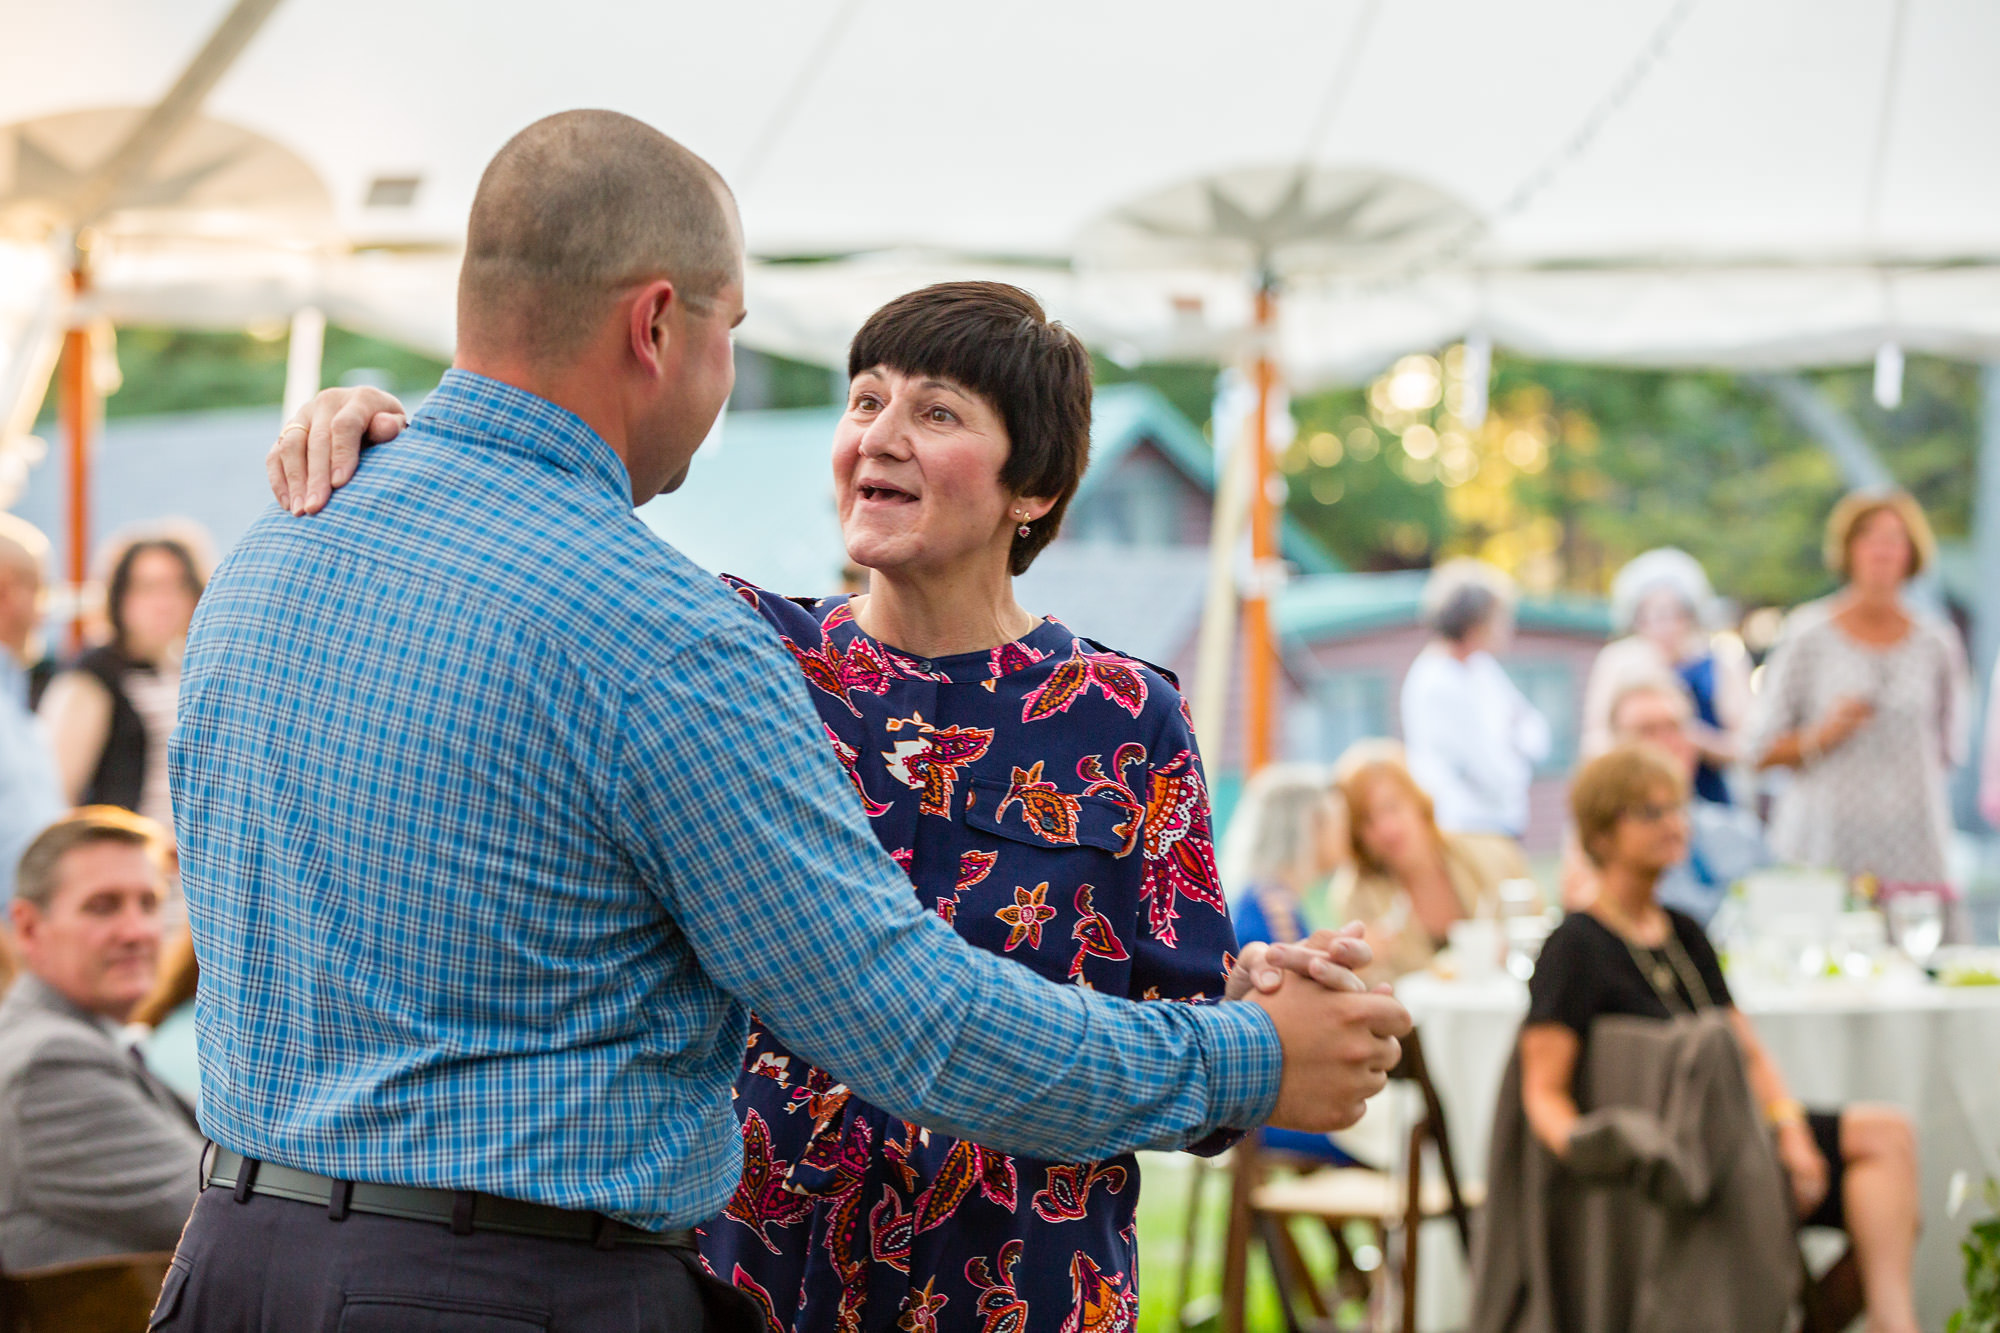 A sweet mother son dance at a wedding at the New England Outdoor Center